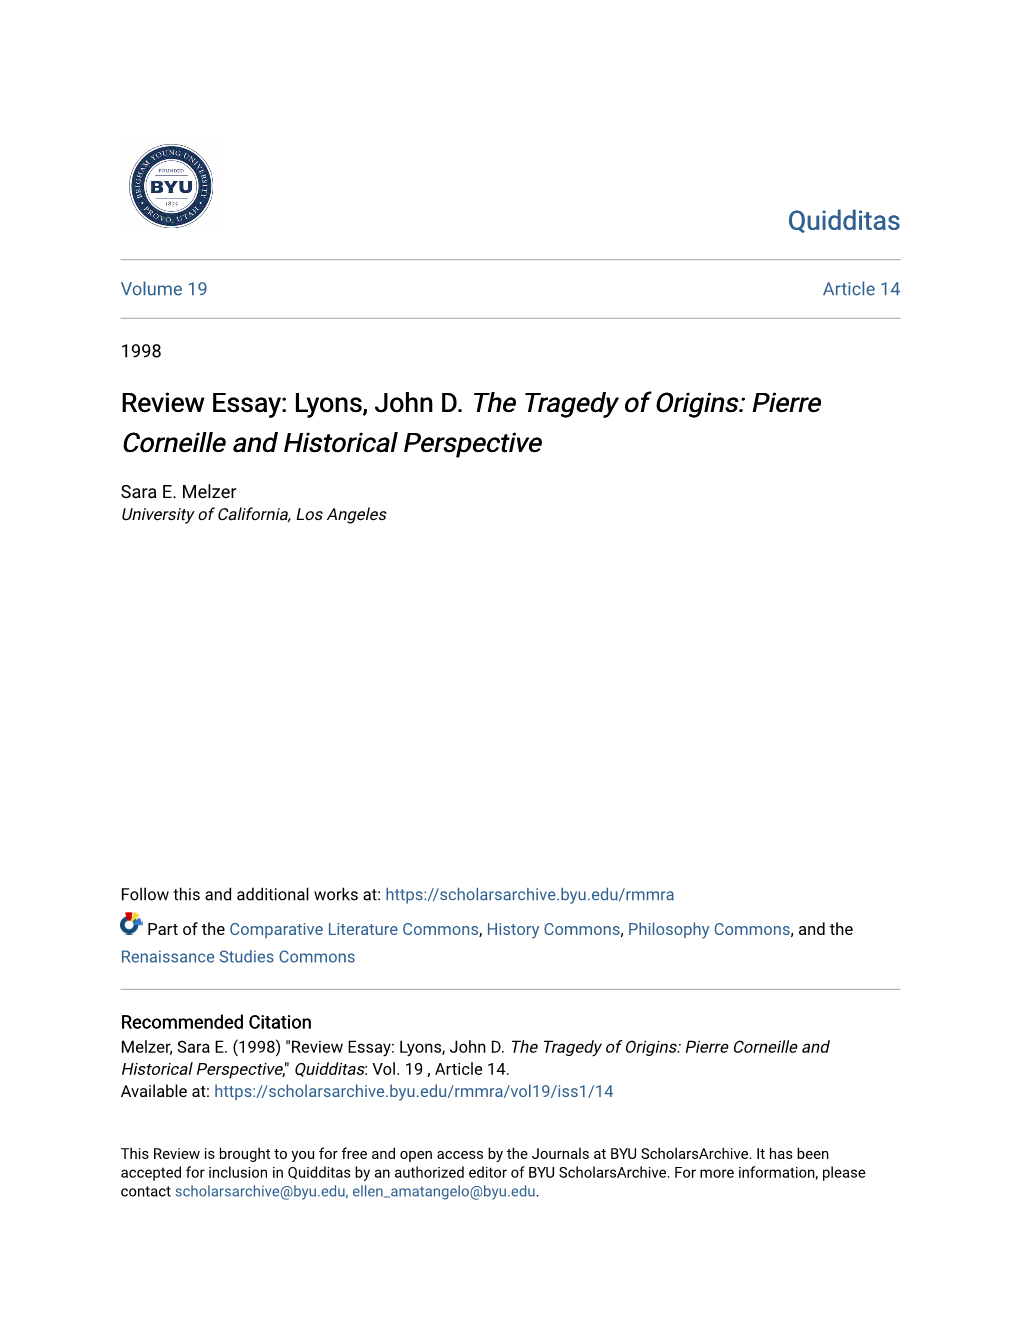 Review Essay: Lyons, John D. &lt;I&gt;The Tragedy of Origins: Pierre Corneille and Historical Perspective&lt;/I&gt;